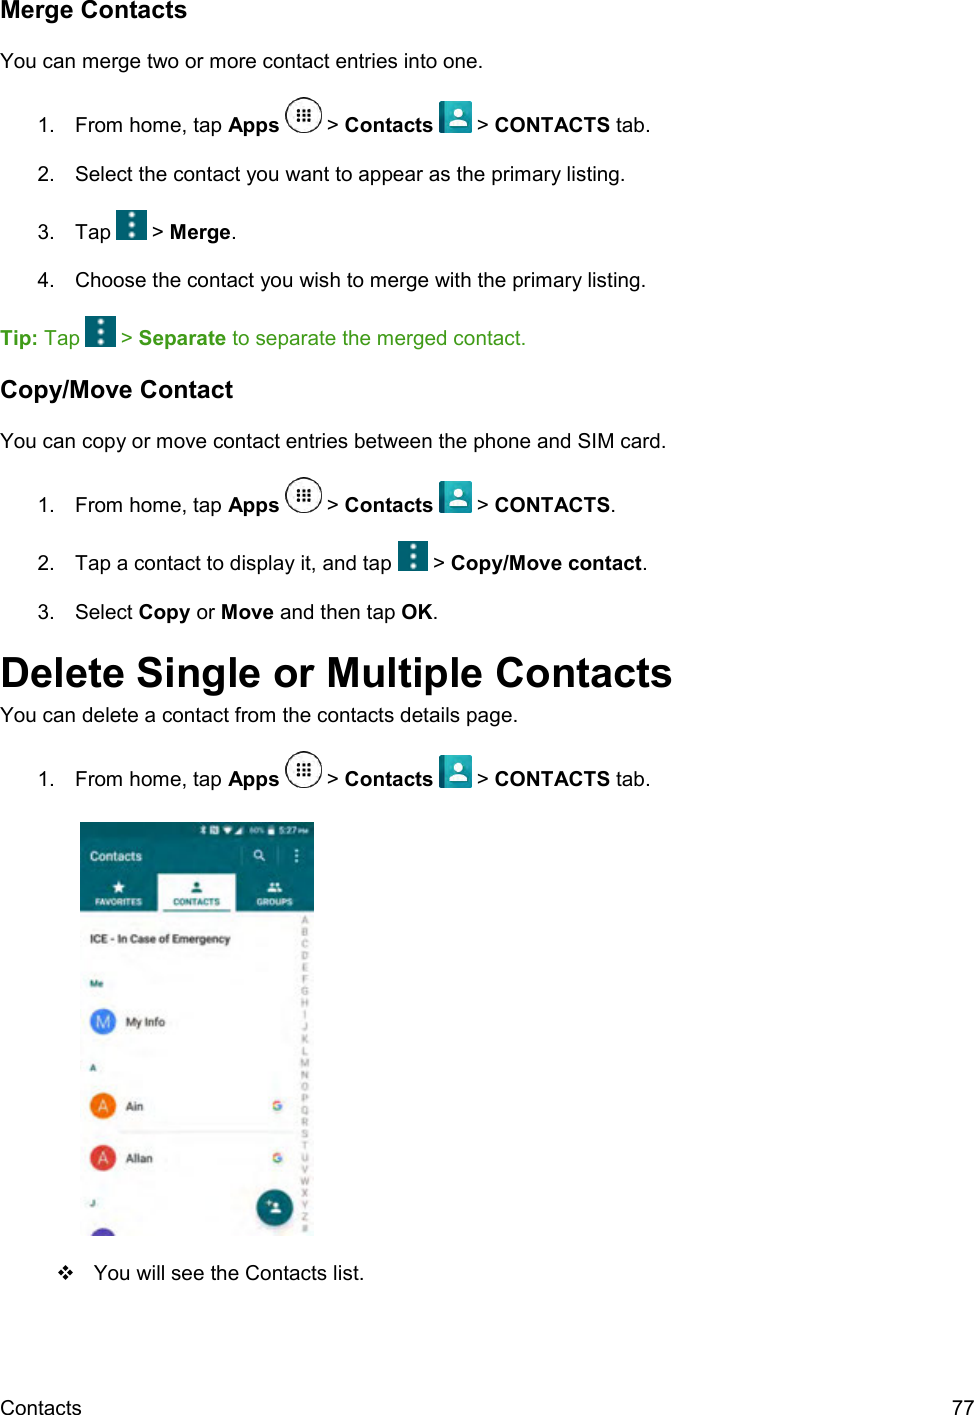  Contacts  77 Merge Contacts You can merge two or more contact entries into one. 1.  From home, tap Apps   &gt; Contacts   &gt; CONTACTS tab. 2.  Select the contact you want to appear as the primary listing. 3.  Tap   &gt; Merge. 4.  Choose the contact you wish to merge with the primary listing. Tip: Tap   &gt; Separate to separate the merged contact. Copy/Move Contact You can copy or move contact entries between the phone and SIM card. 1.  From home, tap Apps   &gt; Contacts   &gt; CONTACTS. 2.  Tap a contact to display it, and tap   &gt; Copy/Move contact. 3.  Select Copy or Move and then tap OK. Delete Single or Multiple Contacts You can delete a contact from the contacts details page. 1.  From home, tap Apps   &gt; Contacts   &gt; CONTACTS tab.       You will see the Contacts list. 